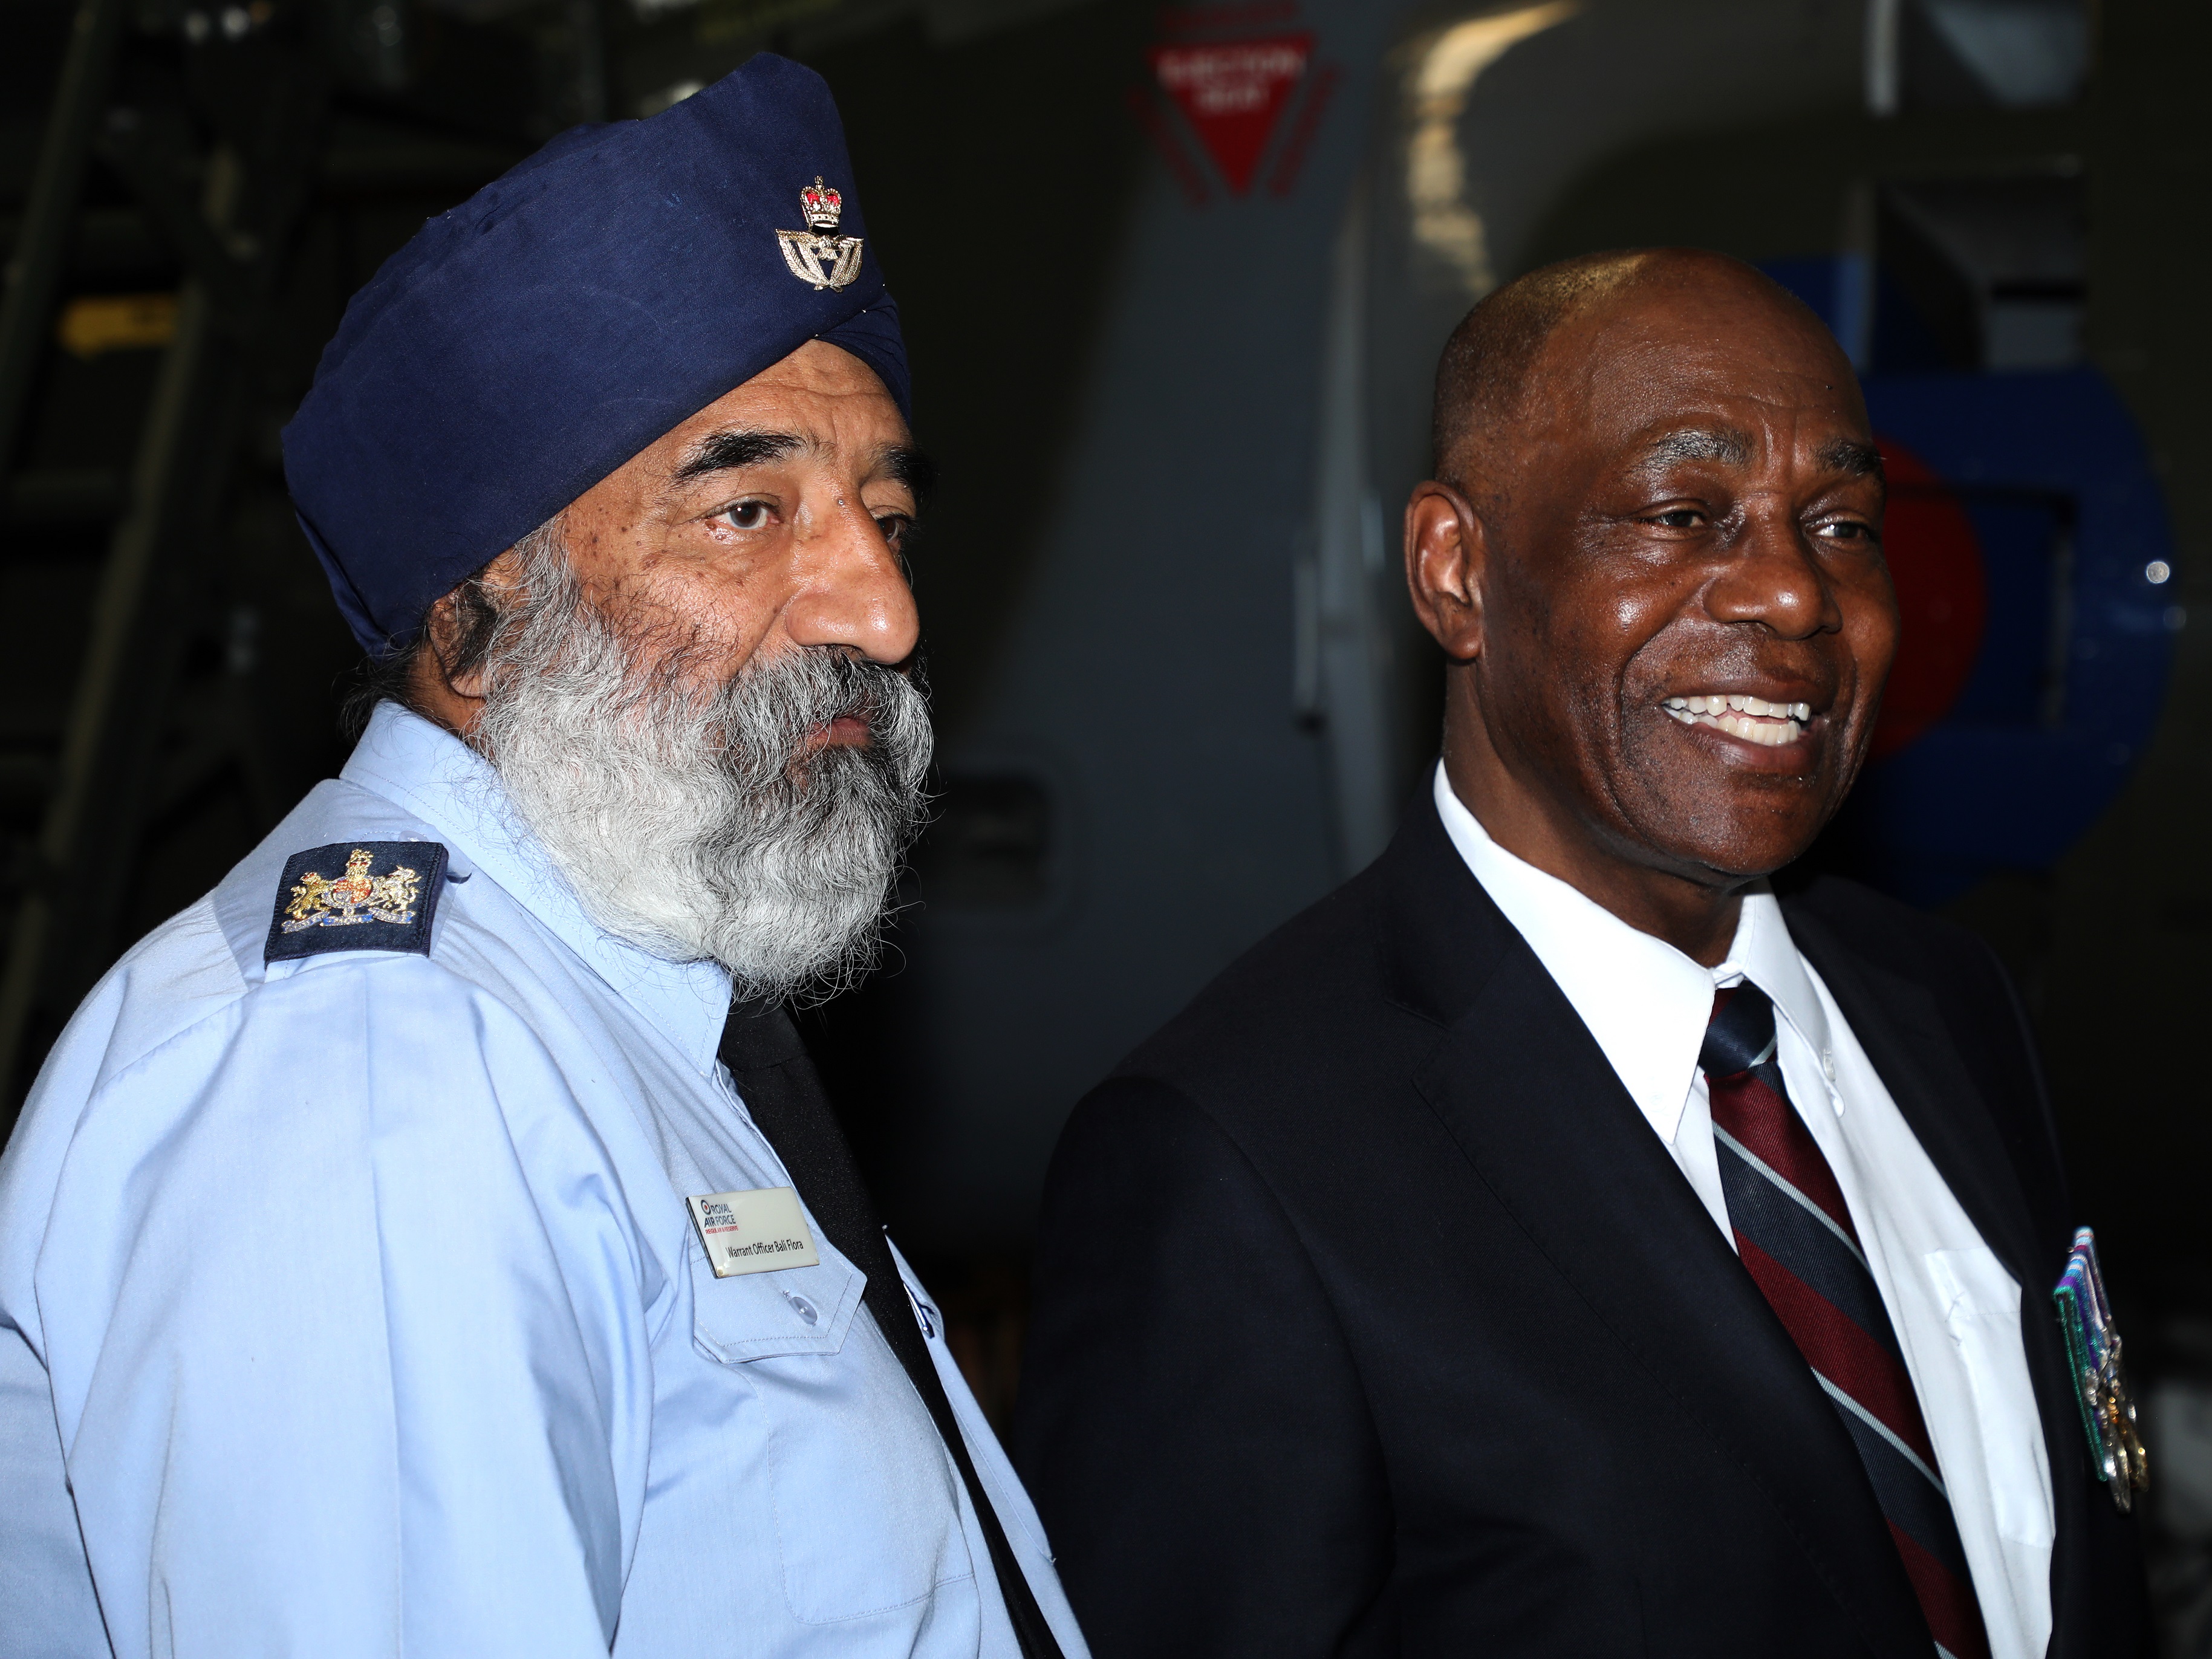 From left to right: Warrant Officer Balbir Singh Flora and retired Warrant Officer Mr Donald Campbell